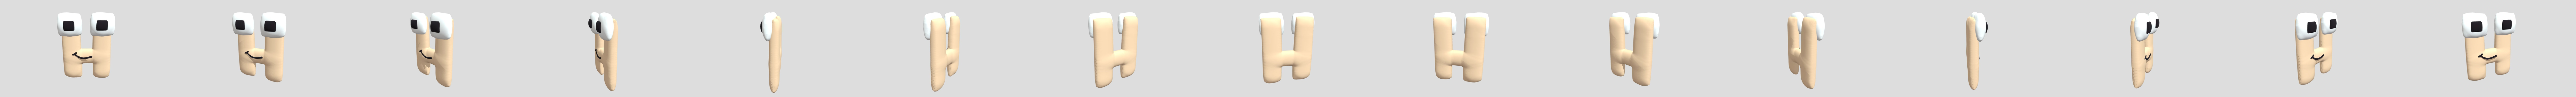 Harrymations Г (Russian Alphabet Lore) - Download Free 3D model by